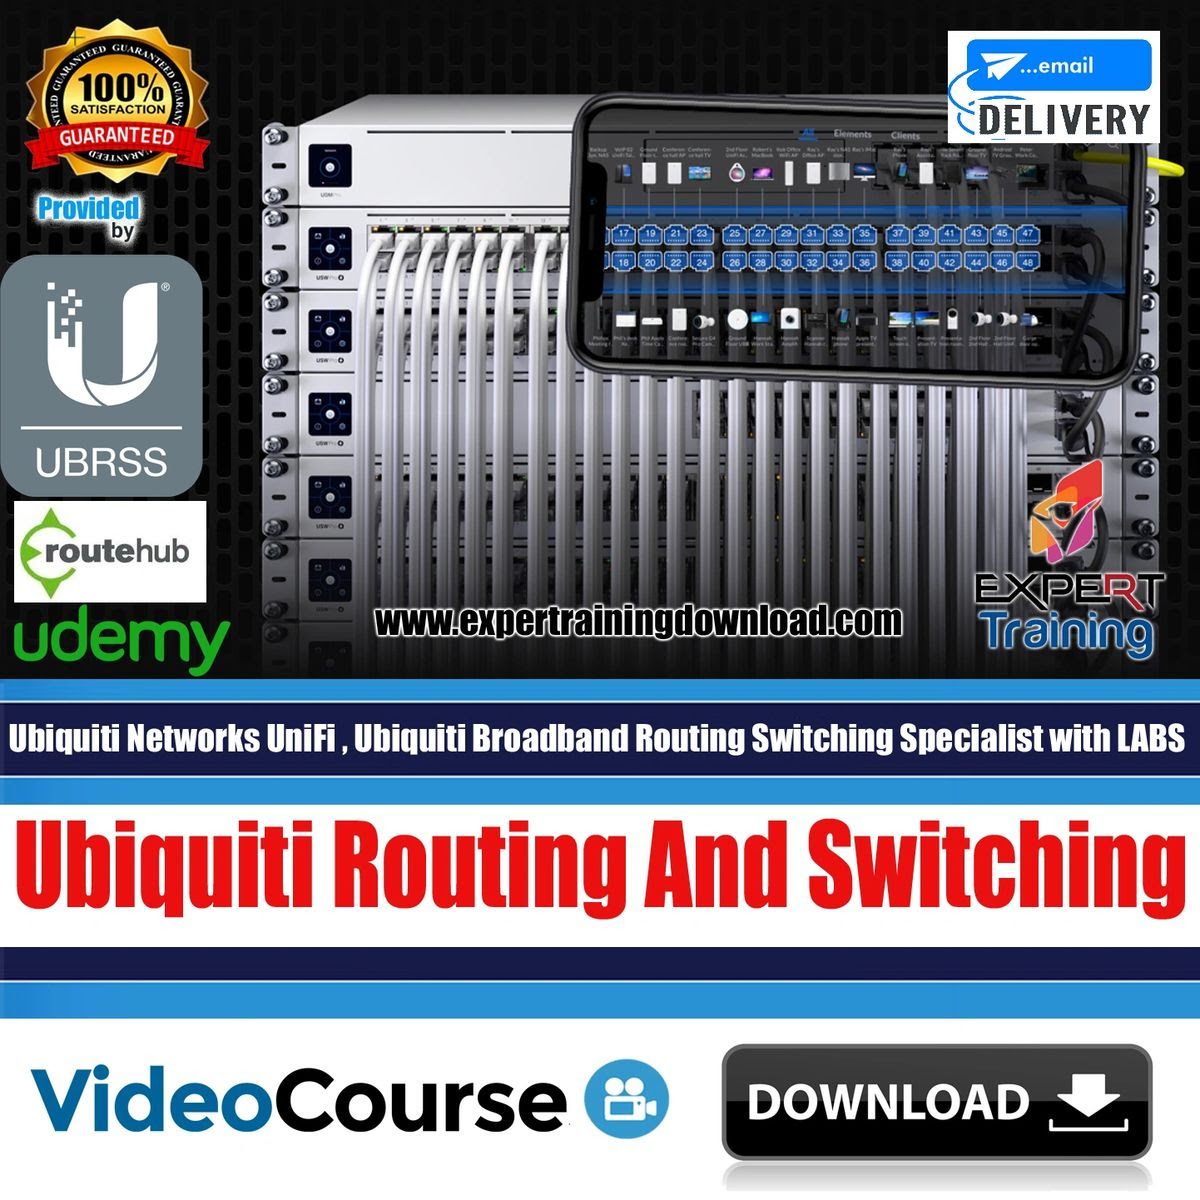 Ubiquiti Broadband Routing & Switching Specialist with LABS